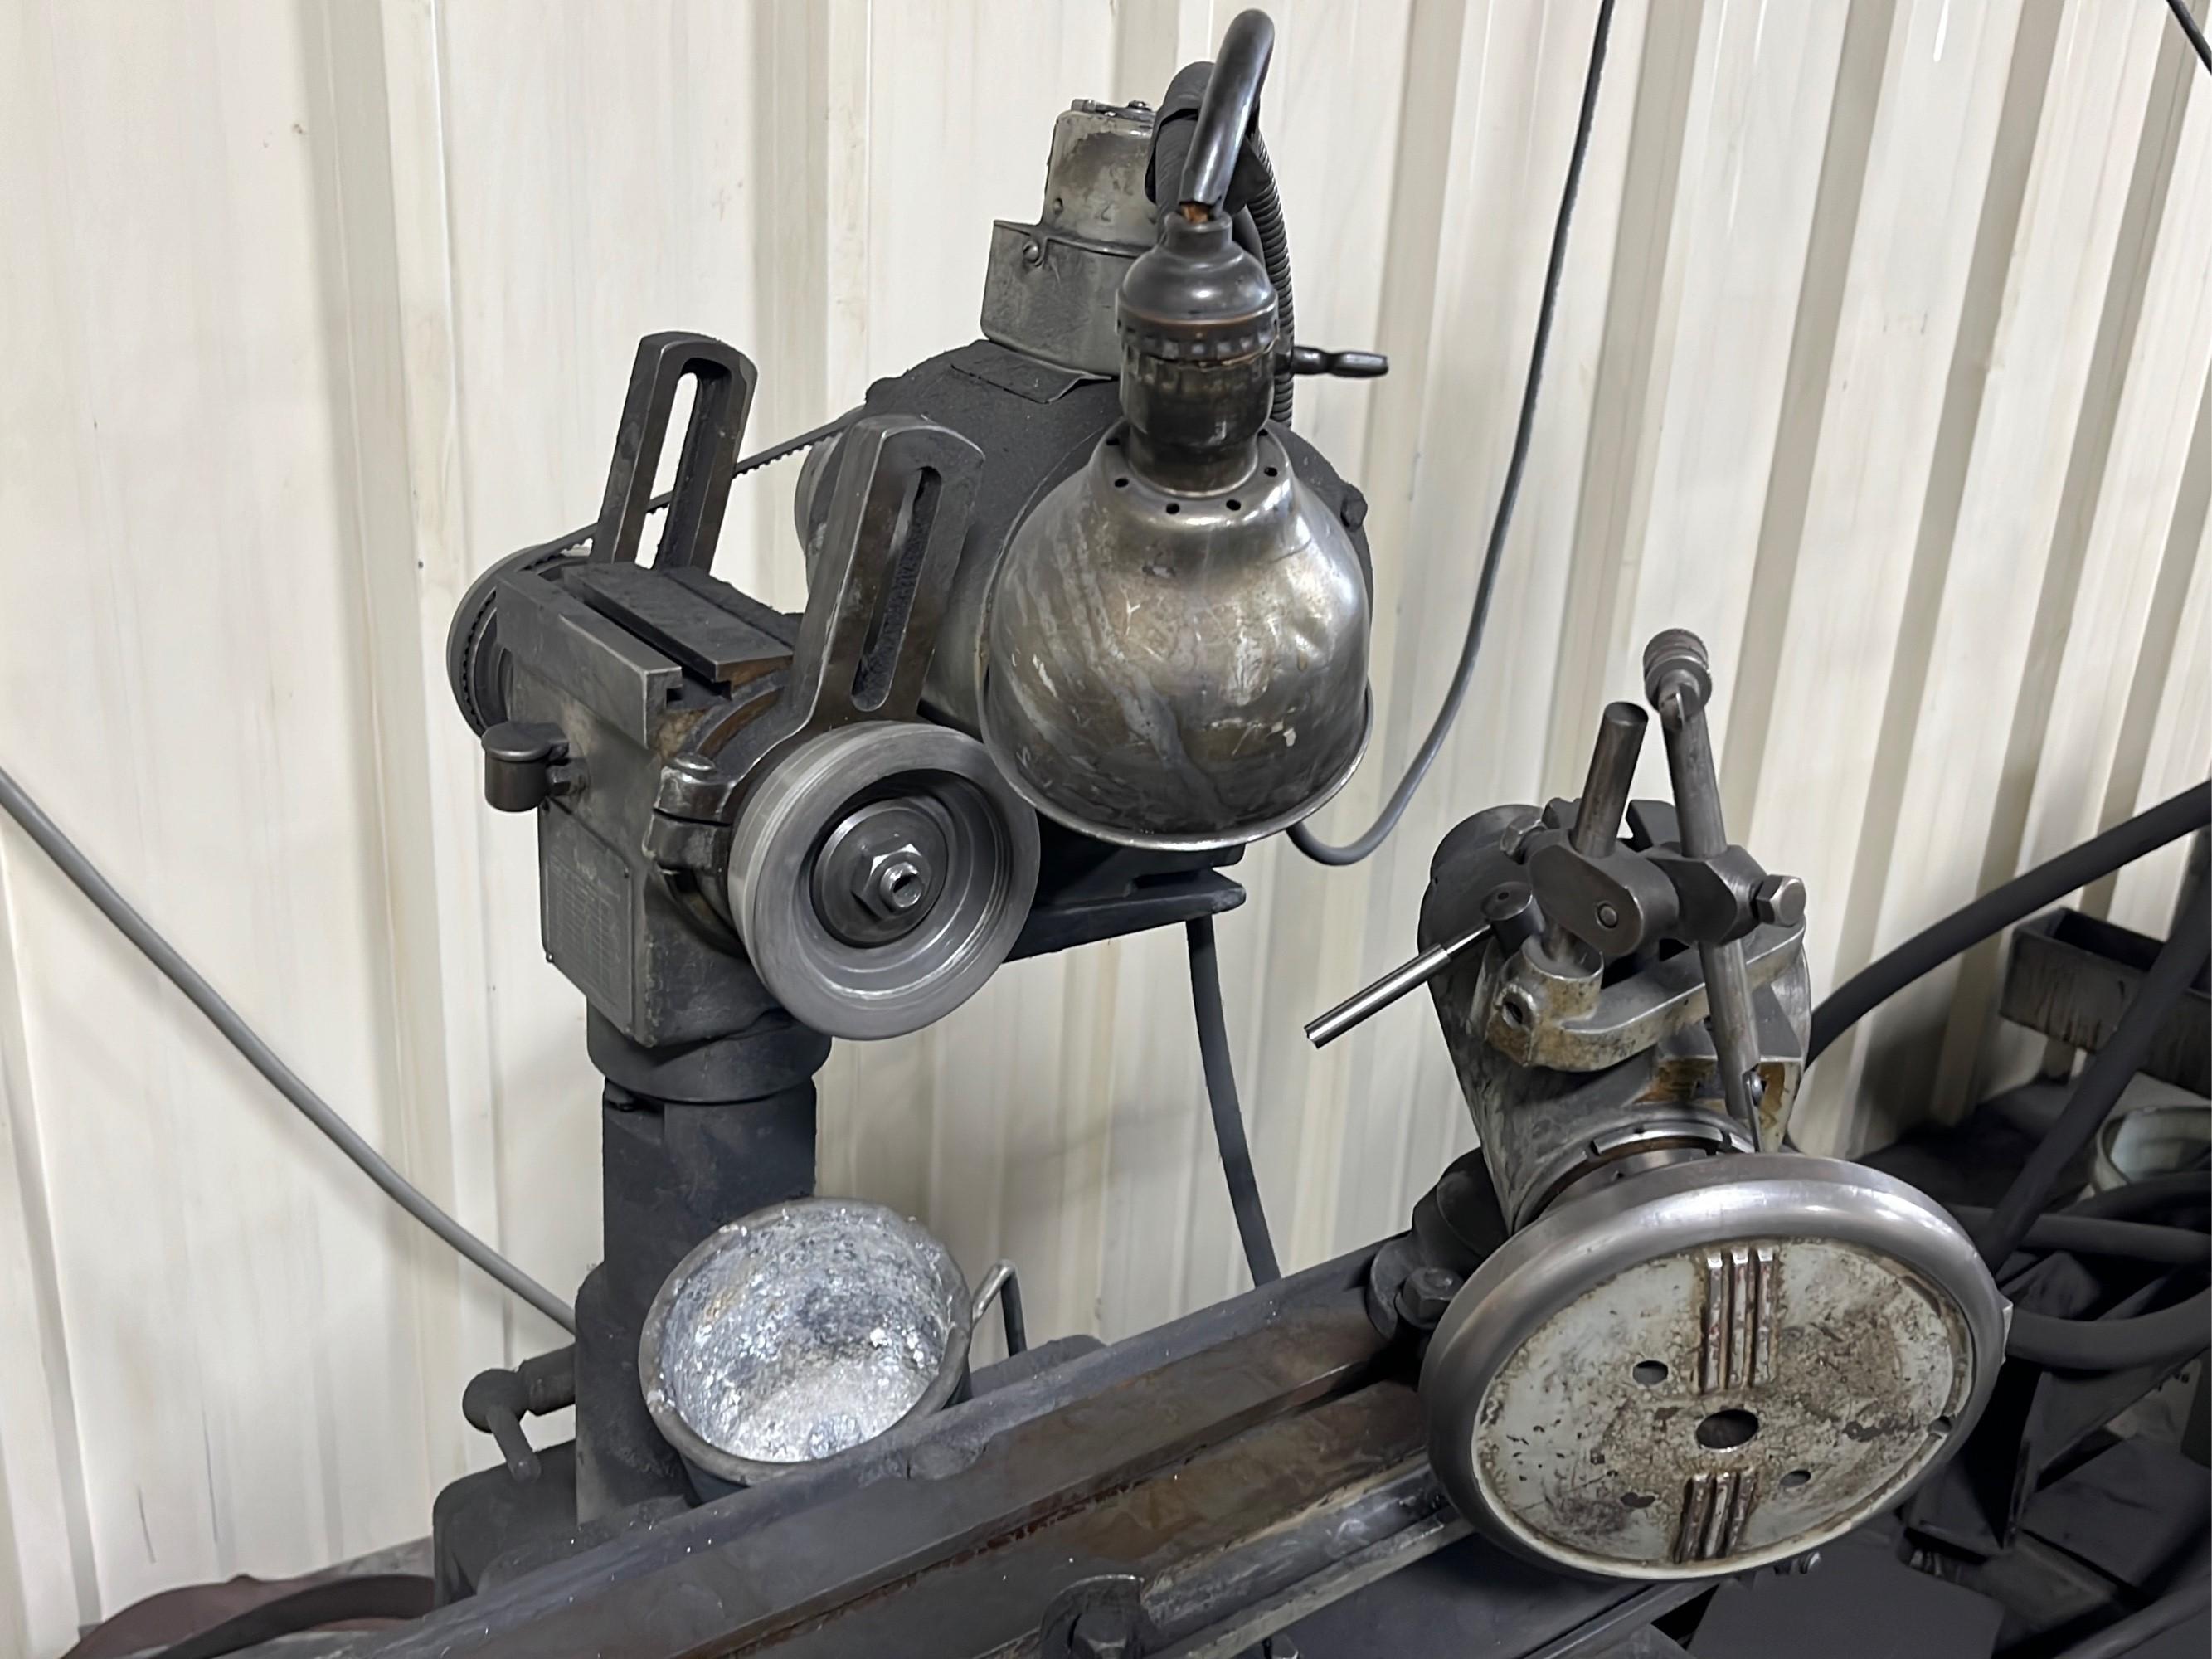 K.O. Lee company model B660 grinder - A $200 Rigging fee will be added to the winning invoice